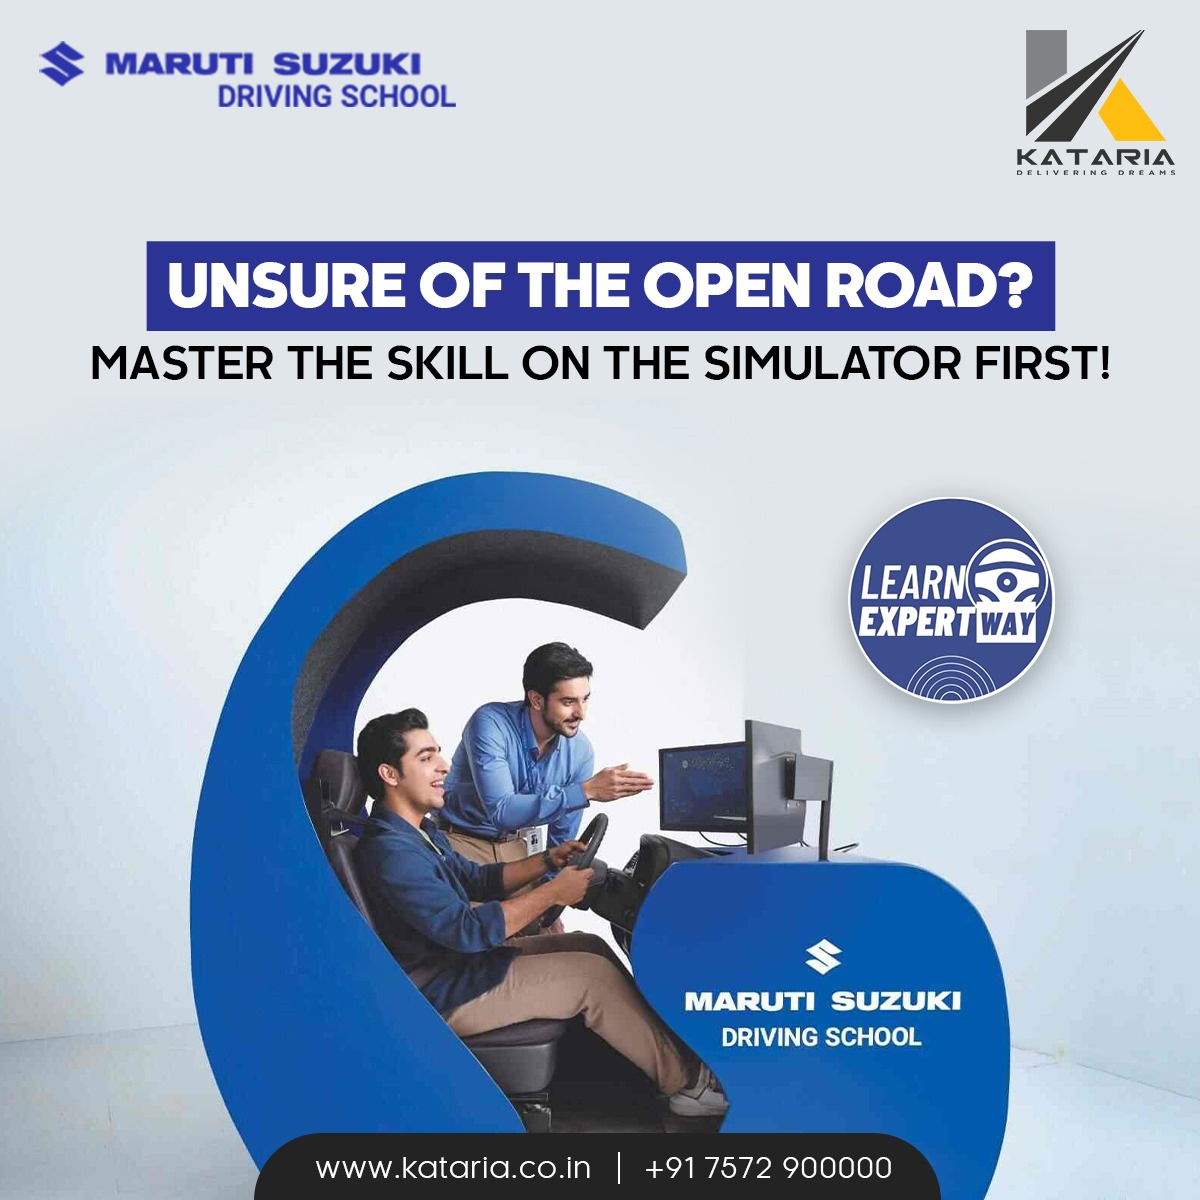 Unsure of the open road? Master the skill on our driving simulator first! Learn the expert way at Kataria Automobiles' Driving School.

Mail us at leads@kataria.co.in or call us at +91 7572900000

#kataria #katariaautomobiles #katariagroup #MarutiSuzuki #KatariaCare